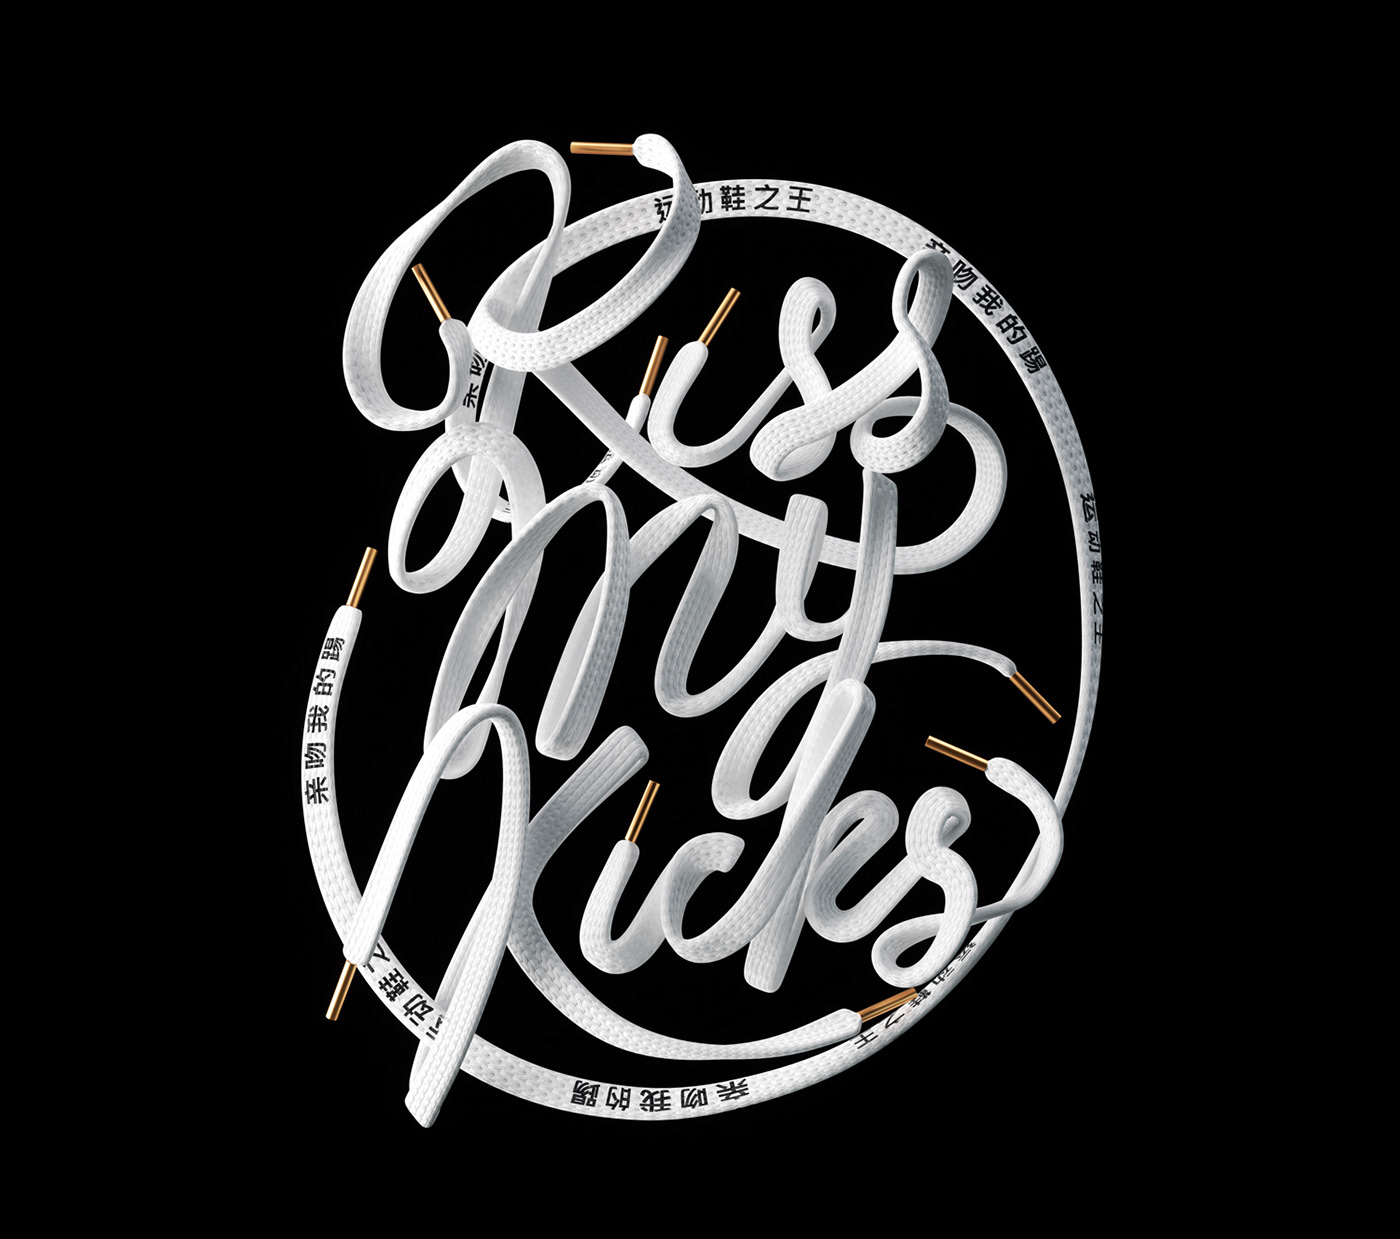 kicks sneakers shoes lace 3D CGI type lettering Nike adidas